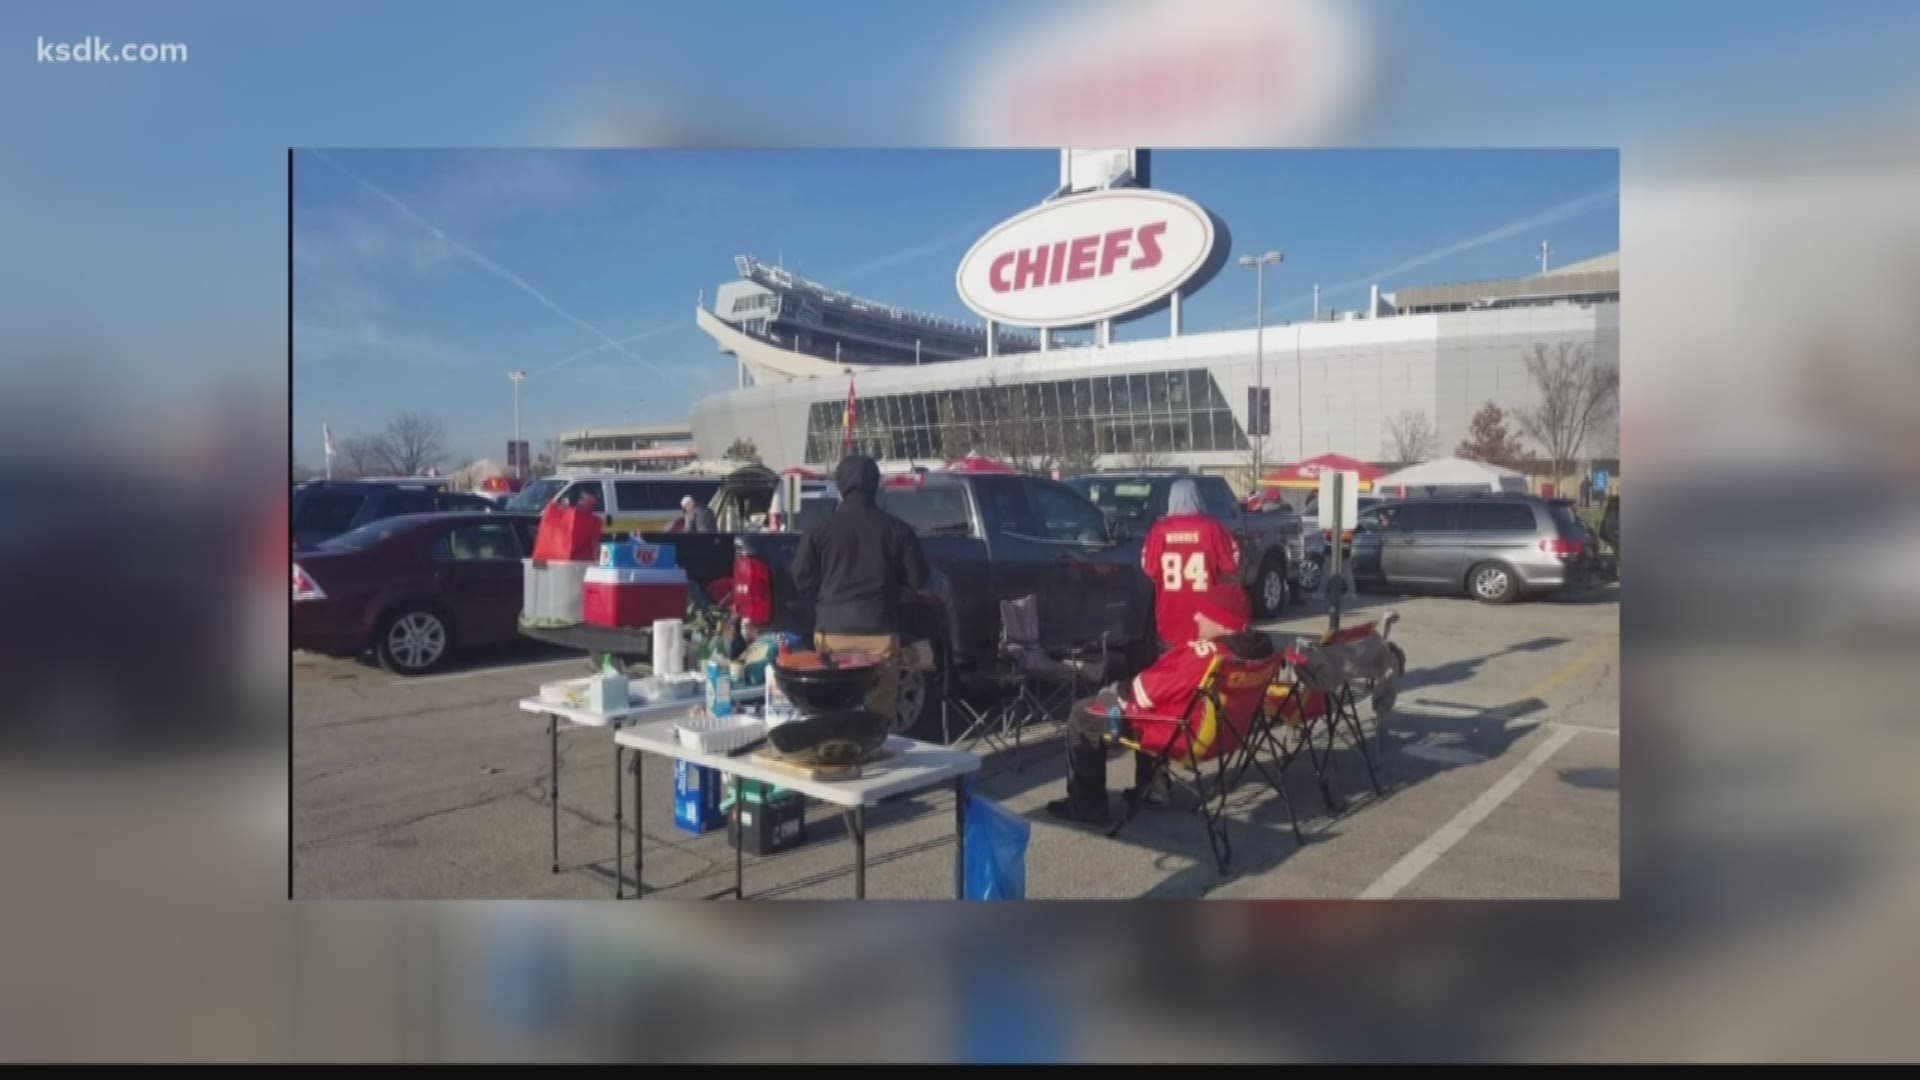 As we brace for another bitterly cold weekend, thousands of folks are going to sit out in it. They're going to layer up to cheer on the Kansas City Chiefs in the AFC Championship at Arrowhead Stadium.